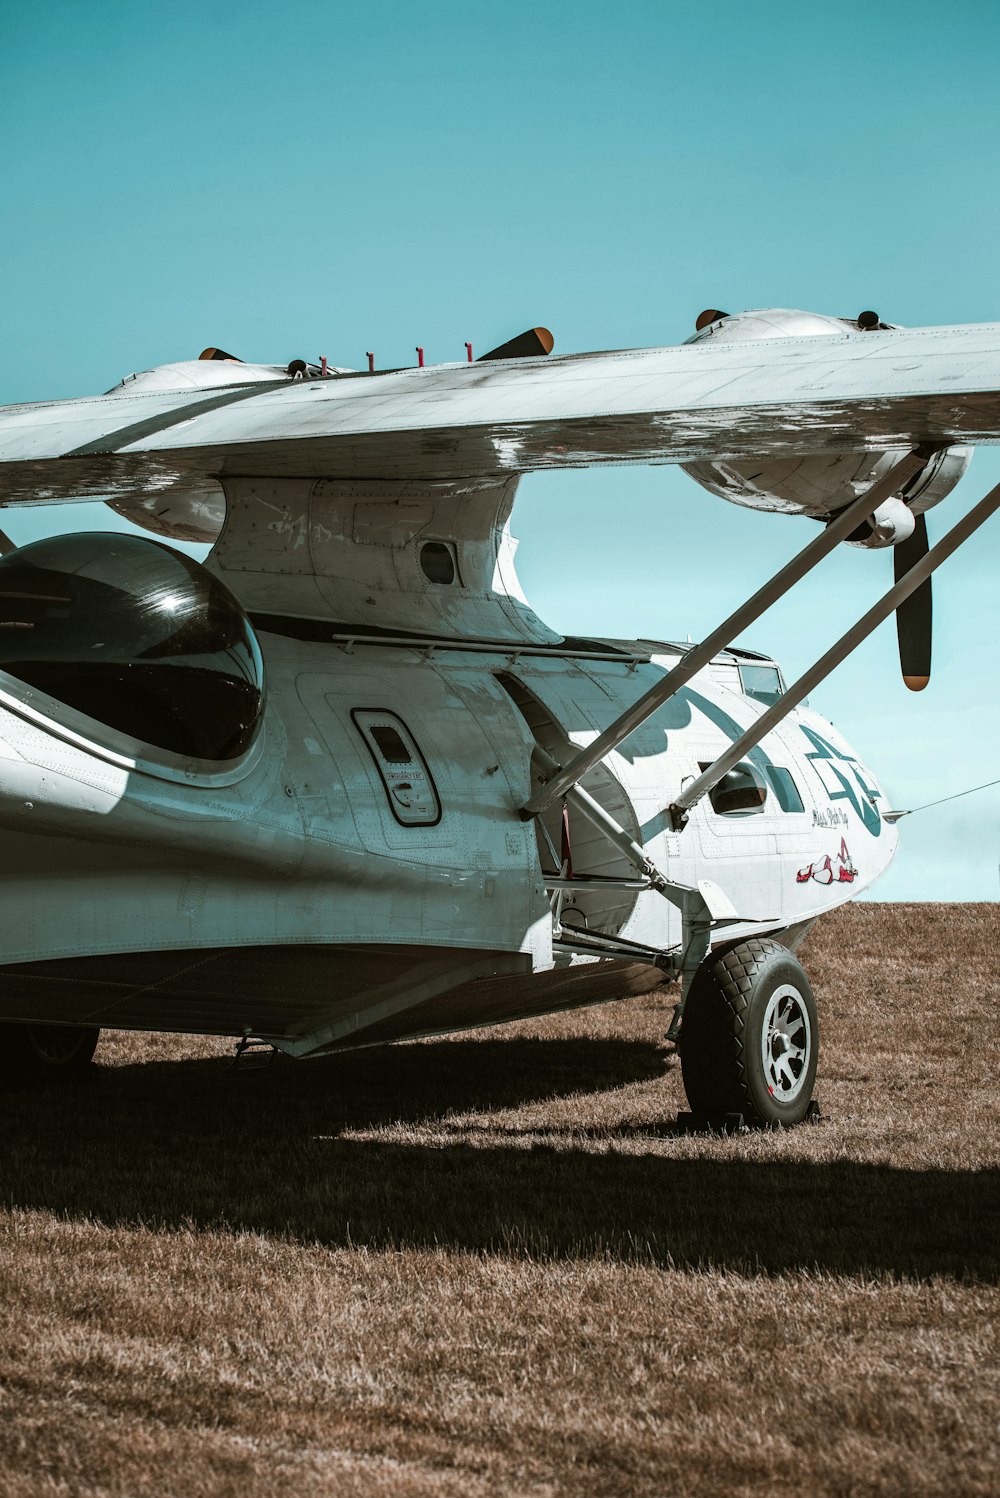 a small airplane parked on top of a dry grass field